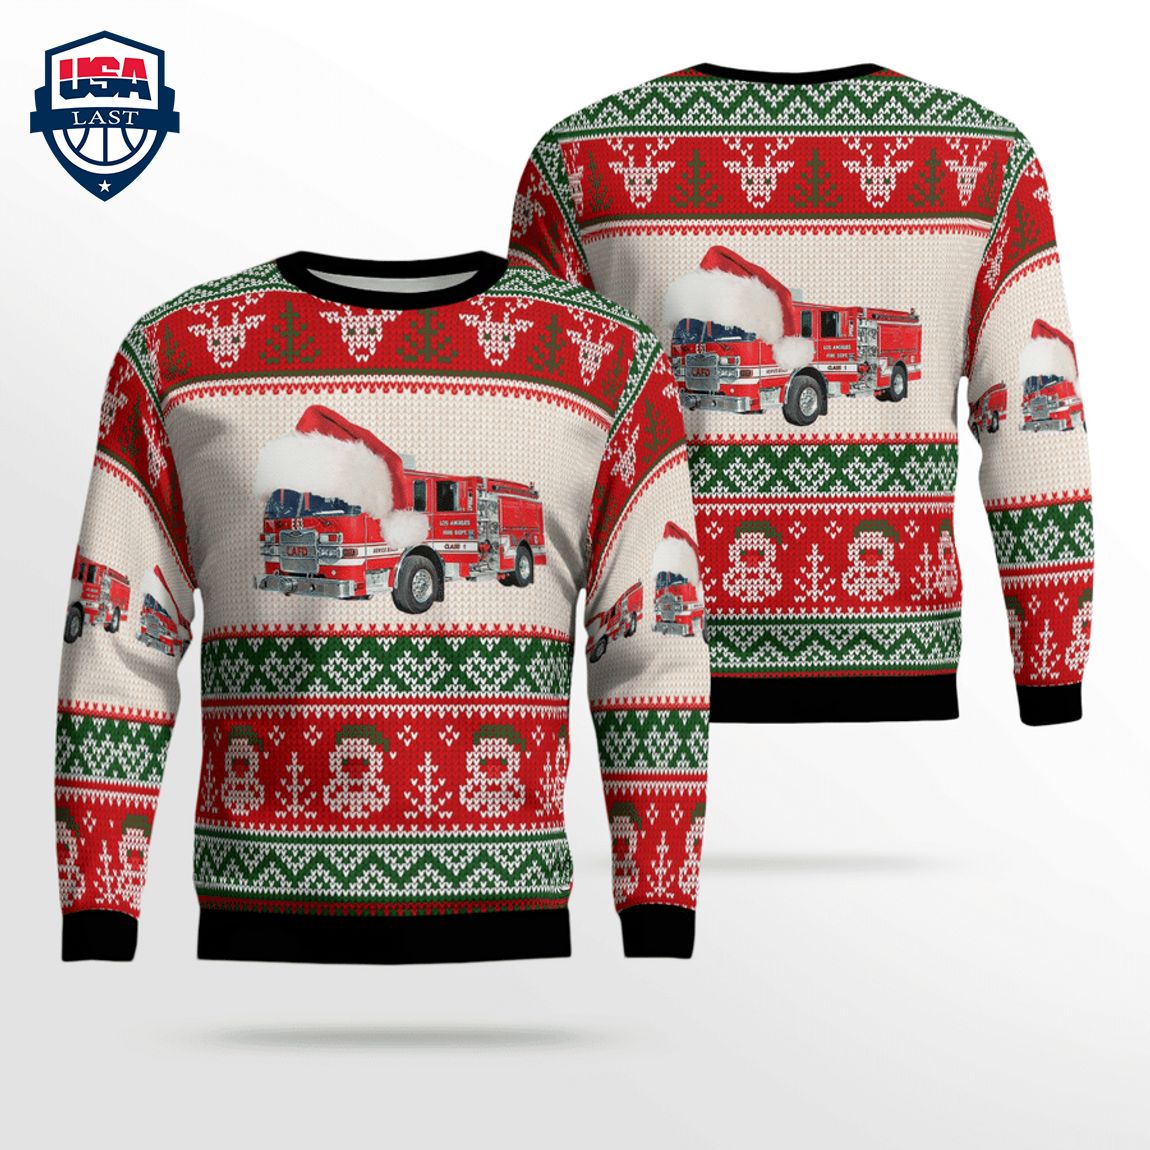 Los Angeles Fire Department 3D Christmas Sweater - Loving, dare I say?